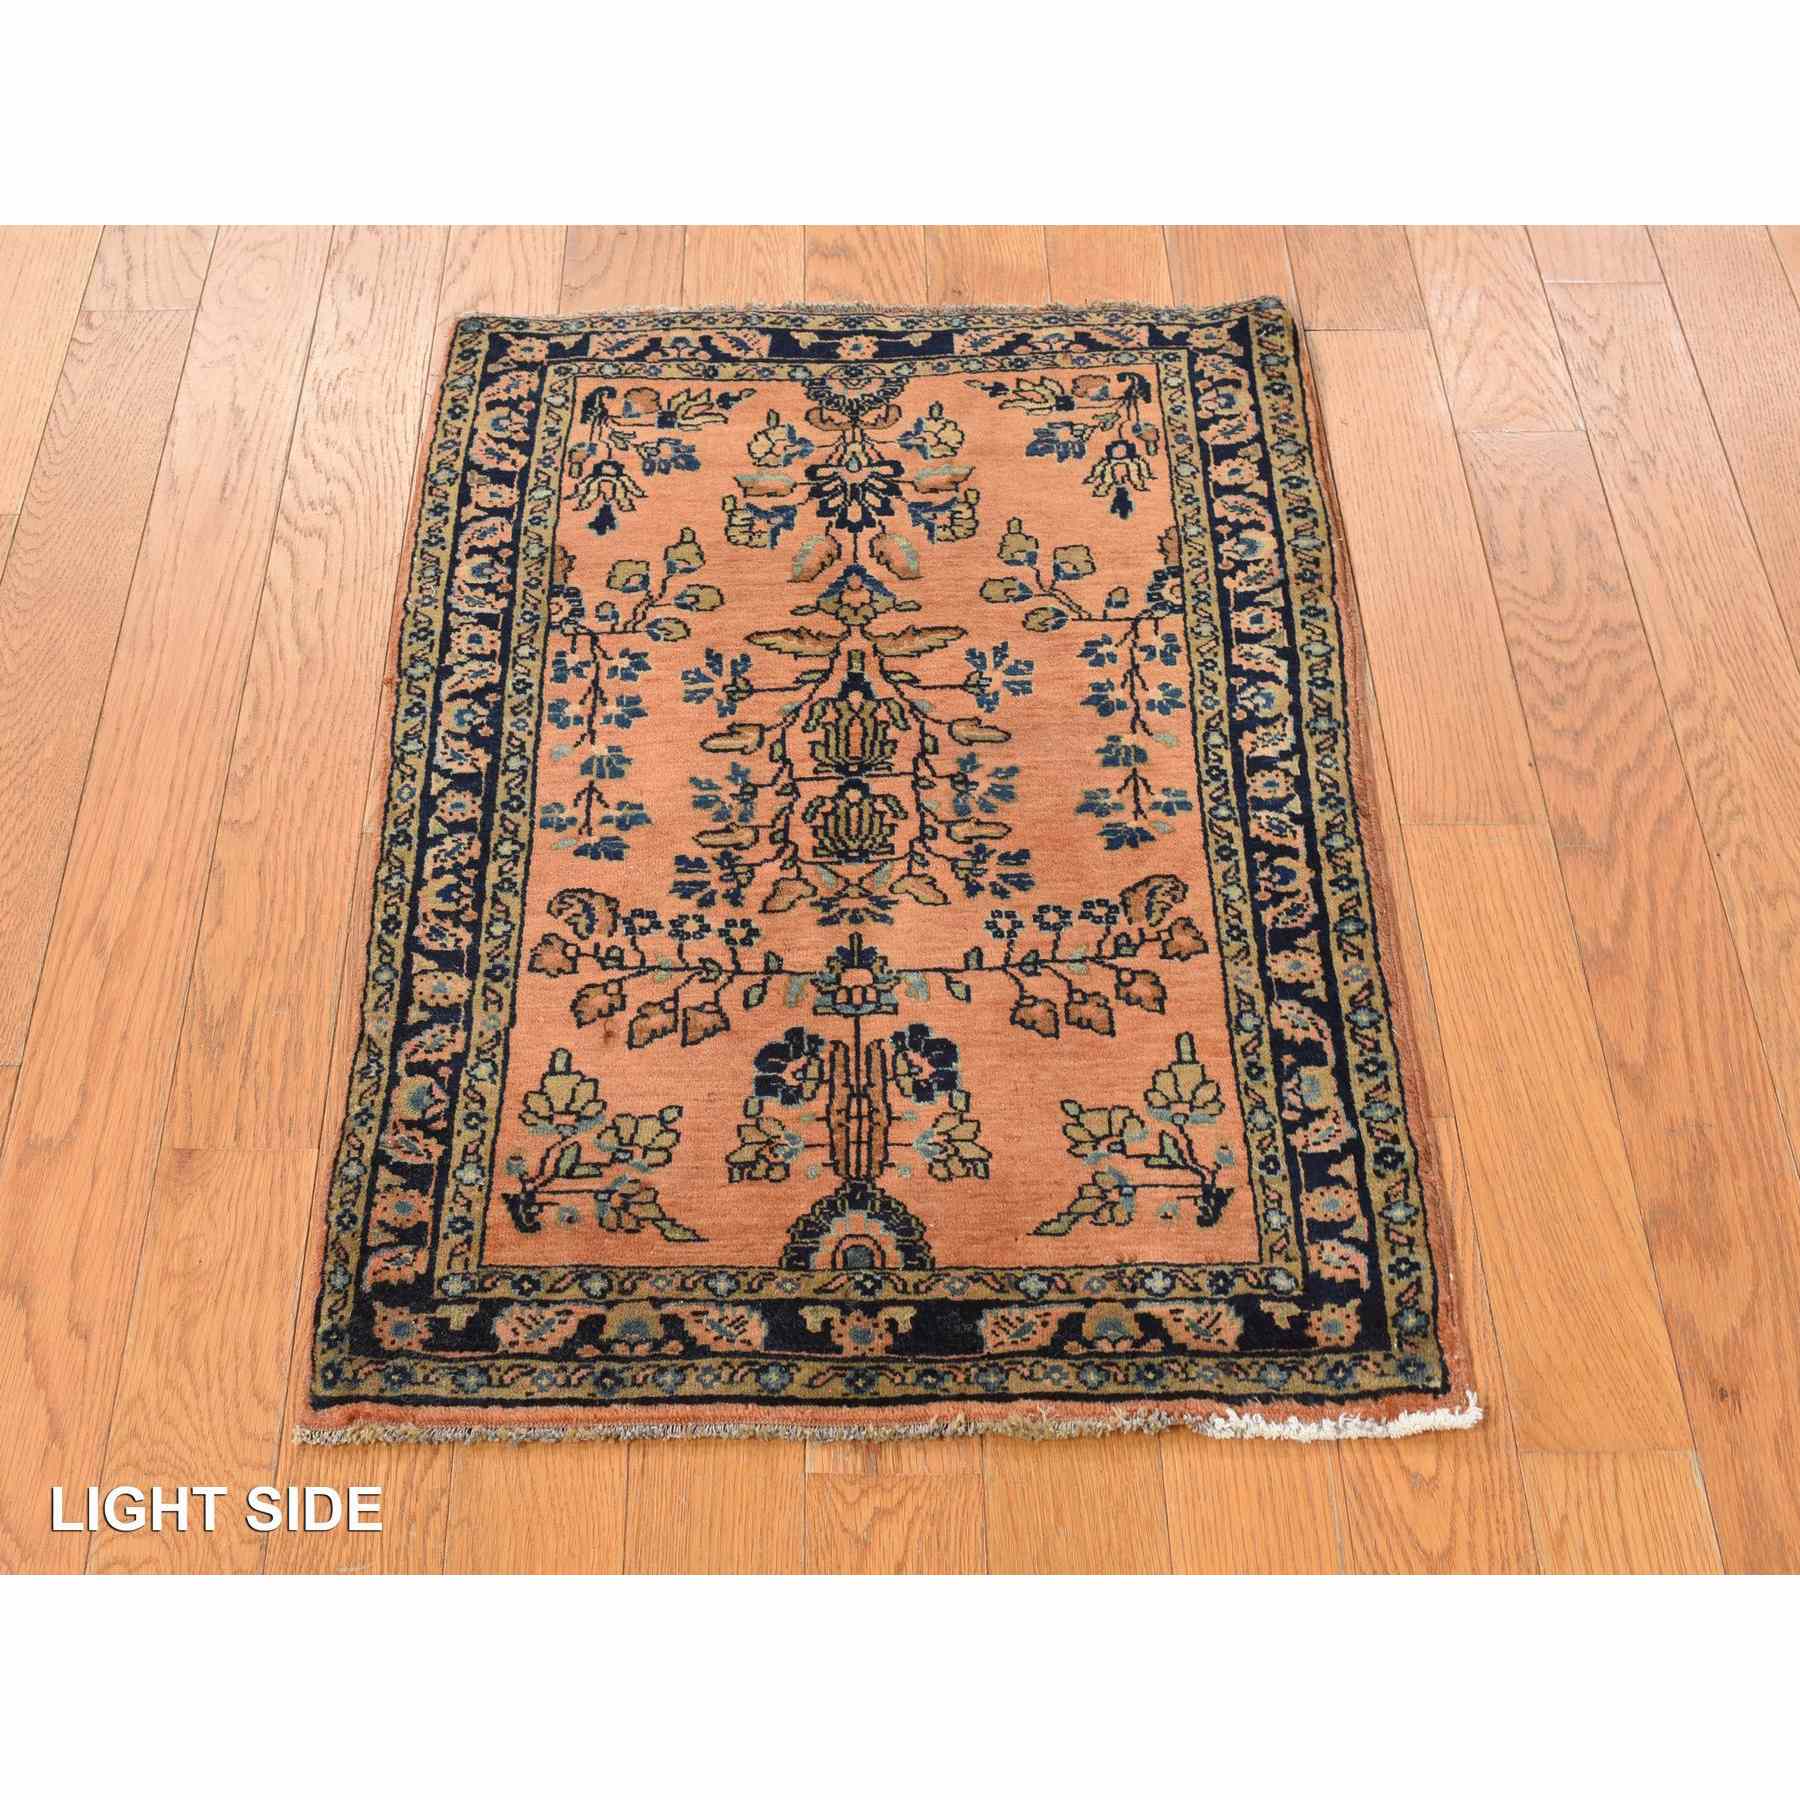 Antique-Hand-Knotted-Rug-390930